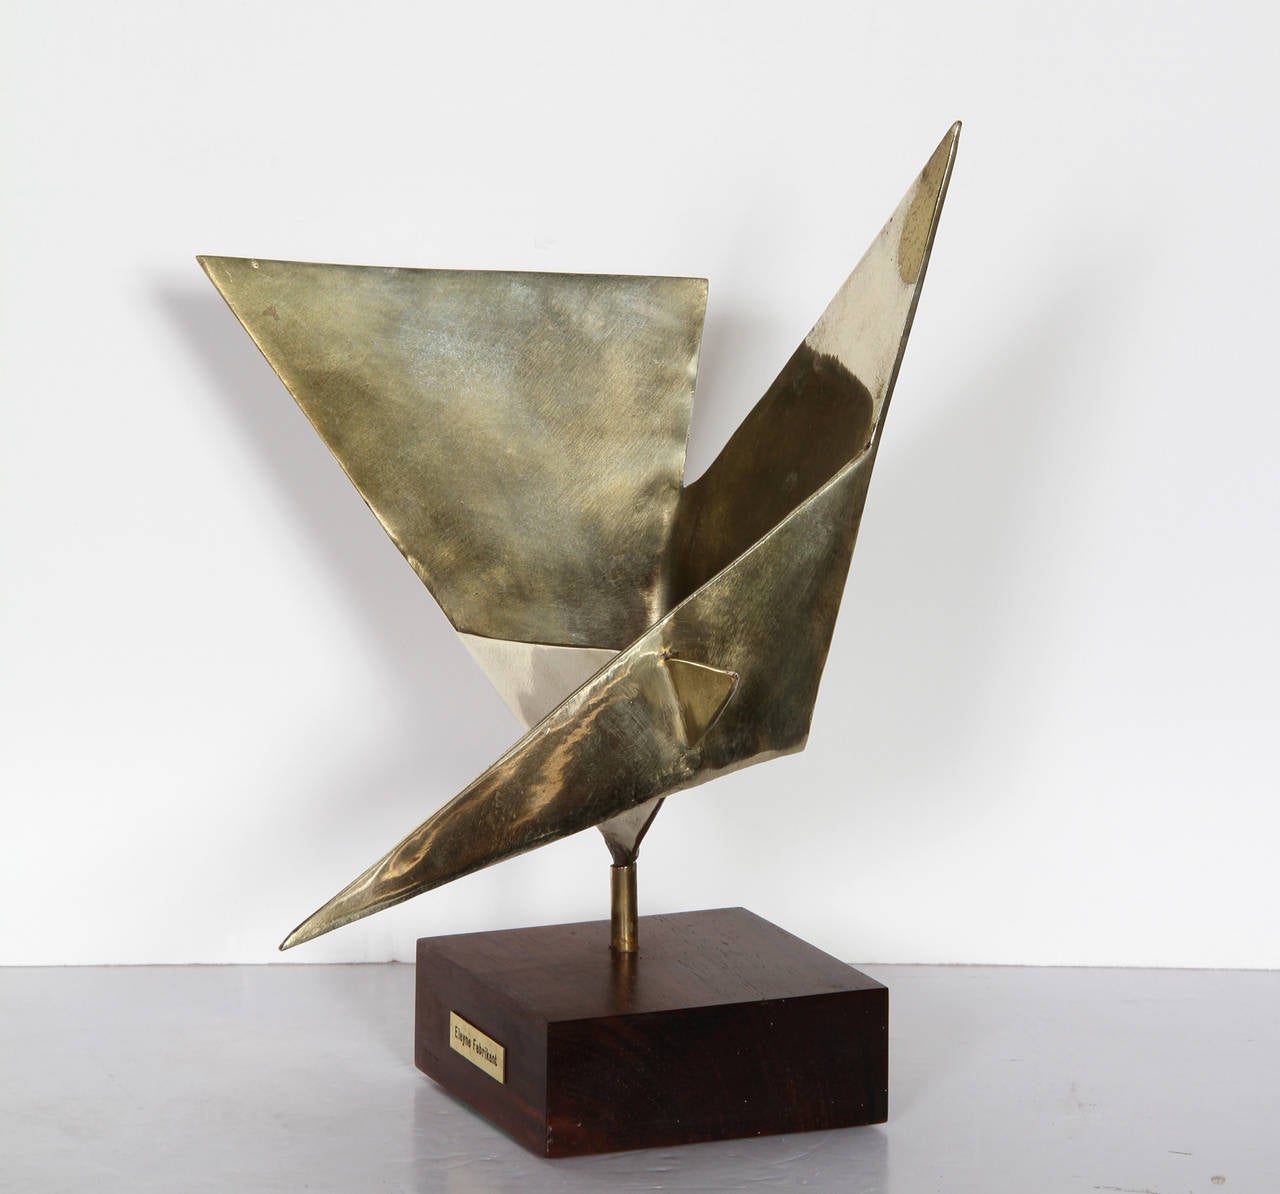 Artist: Elayne Fabrikant
Title: Geometric Abstract
Year: 1970
Medium: Polished Bronze Sculpture, Signature and Date inscribed
Size: 12 in. x 11 in. x 10 in. (30.48 cm x 27.94 cm x 25.4 cm)